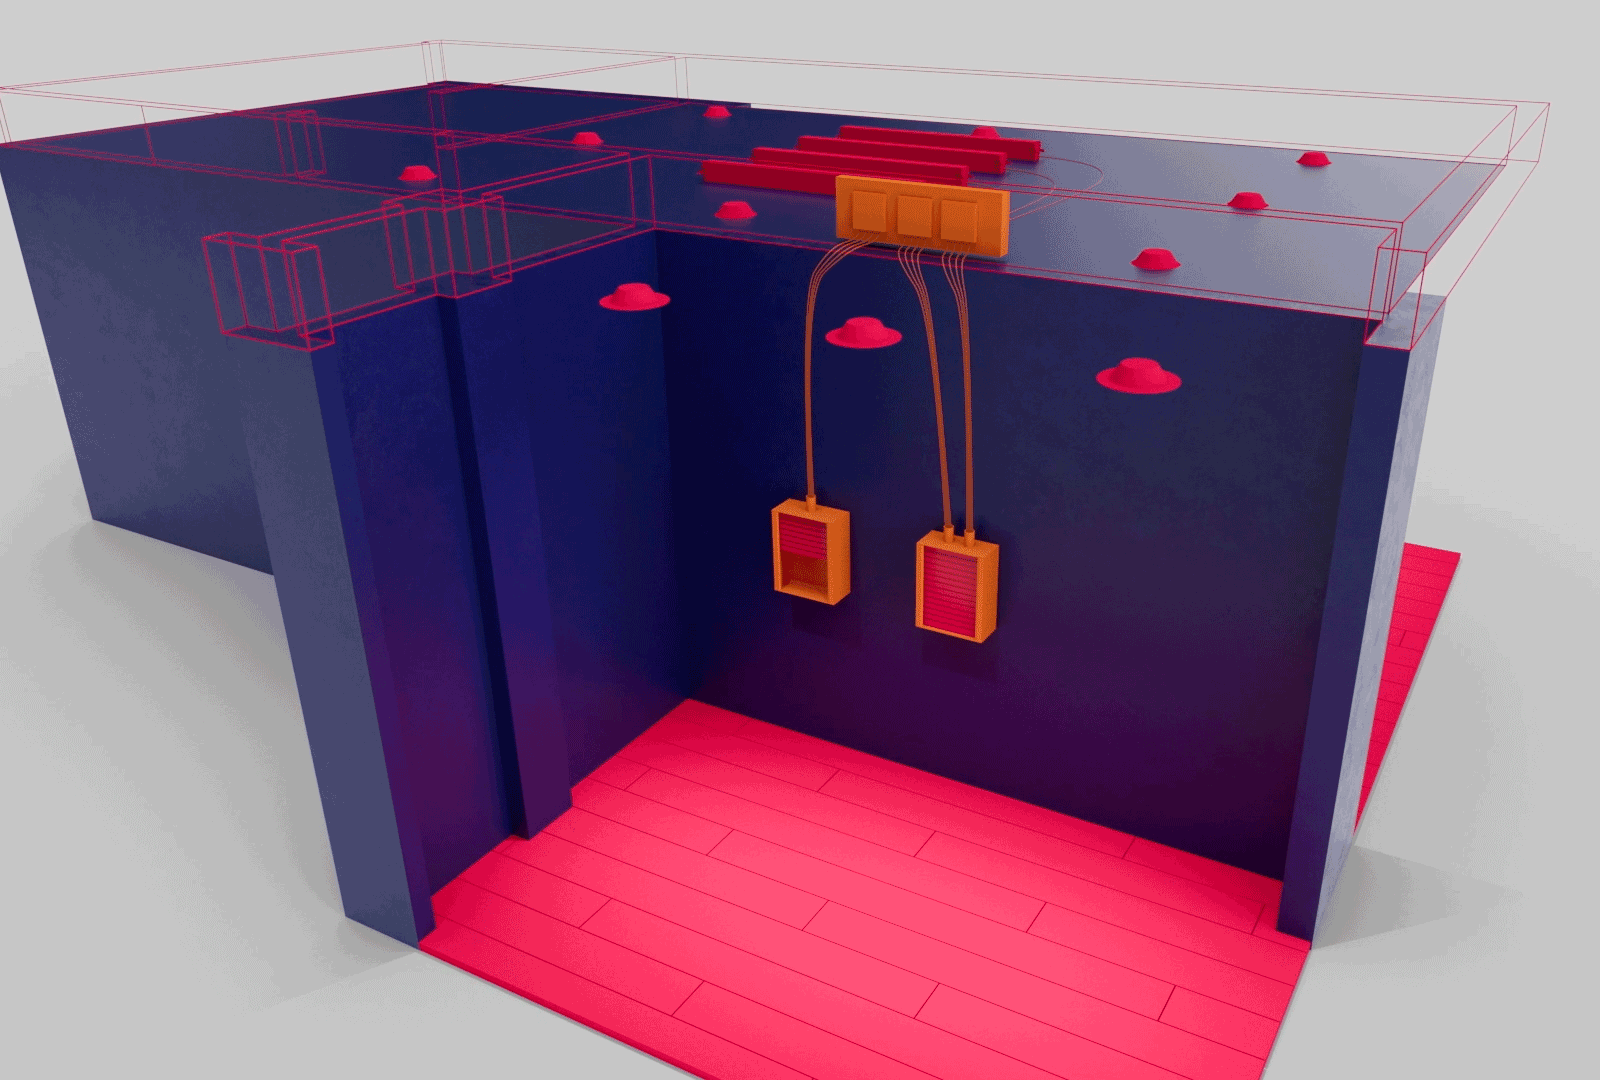 Room, for Lytei 3d 3d animation room structure